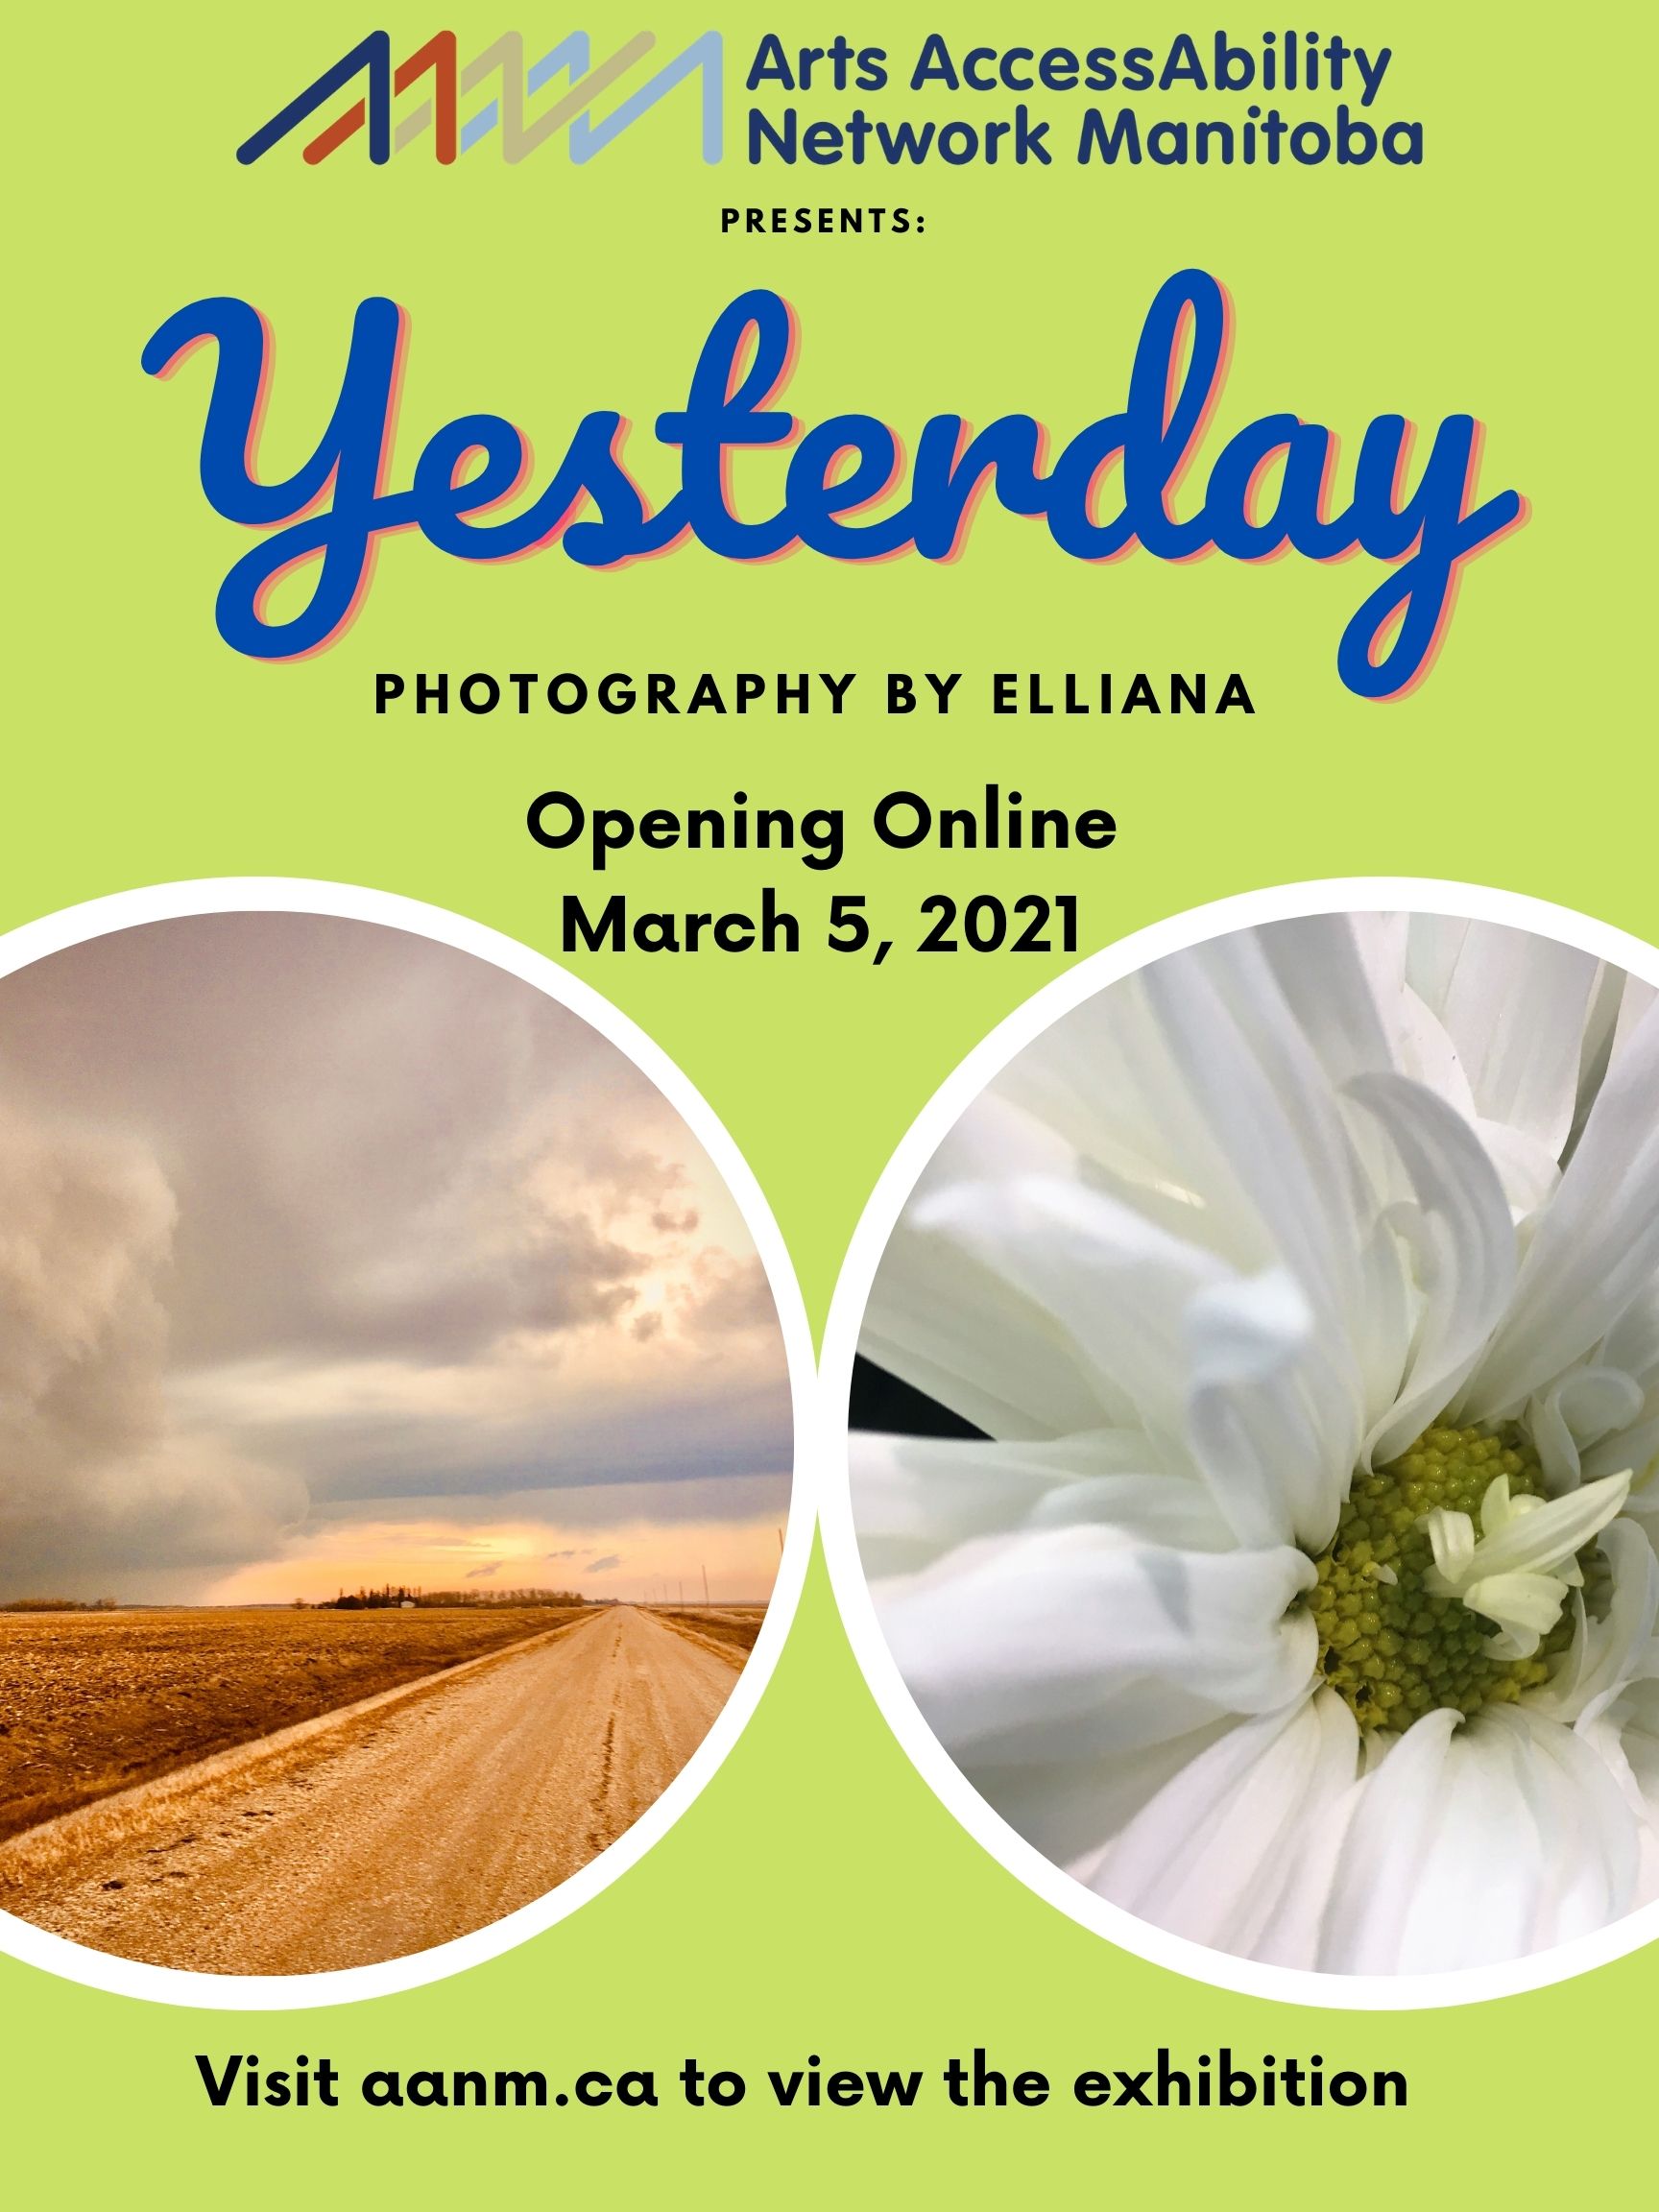 Vibrant spring green poster will two round photographs with white boarders. The two images are placed in line with each other 2/3 down the poster. The image on the left is a gravel road next to a plowed field. The sky is cloudy and looks like a storm is on the way. The image has a golden glow. The photograph on the right is a close up of a white flower with a green center. There are small white petals growing from the green center. At the top of the poster is AANM’s logo with the text “Arts AccessAbility Network Manitoba presents:” Below this is the word “Yesterday” in large blue letters. Below in black the text reads “Photography by Elliana. Opening Online March 5, 2021” Below the images in black is the following text “Visit aanm.ca to view the exhibition”